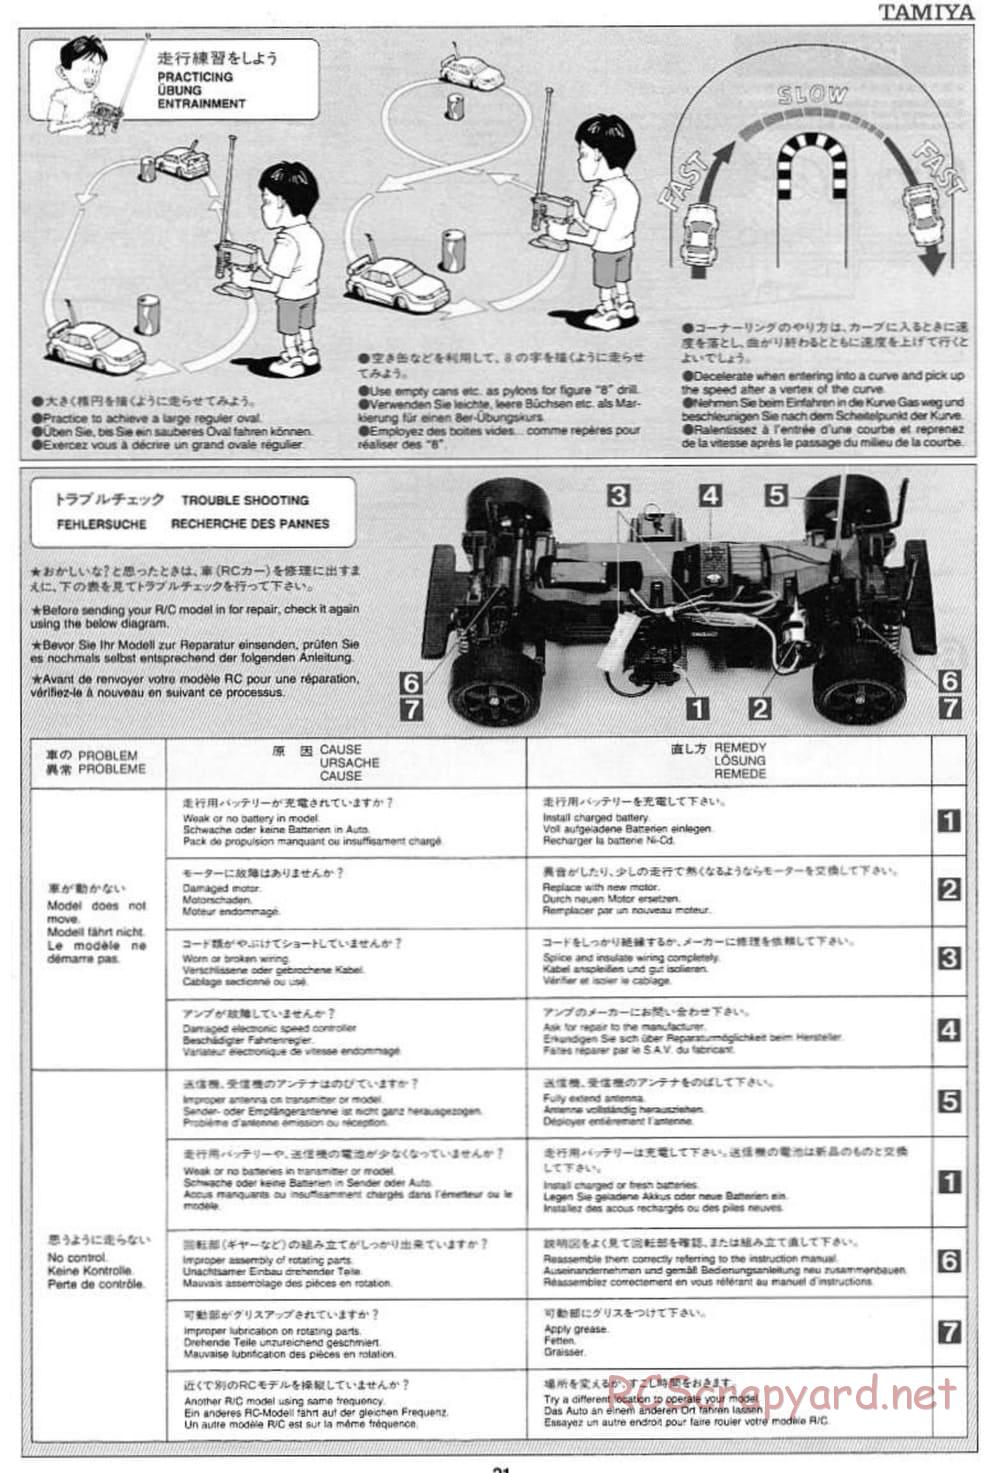 Tamiya - Pennzoil Nismo GT-R - TL-01 Chassis - Manual - Page 21